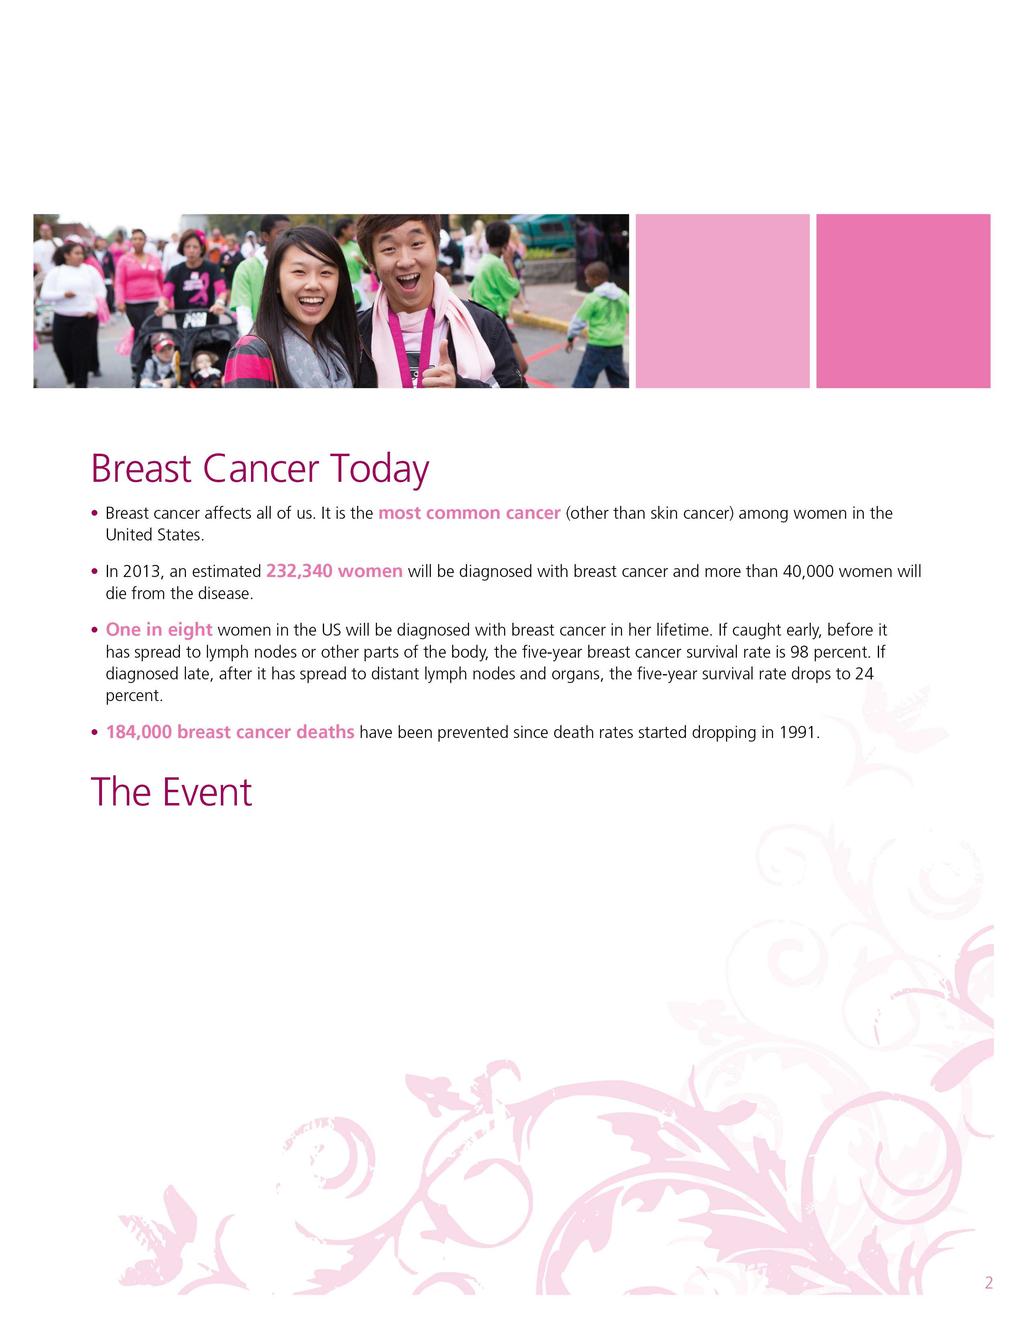 The American Cancer Society Making Strides Against Breast Cancer network of breast cancer awareness events is the largest in the nation, uniting nearly 300 communities to fund the fight.